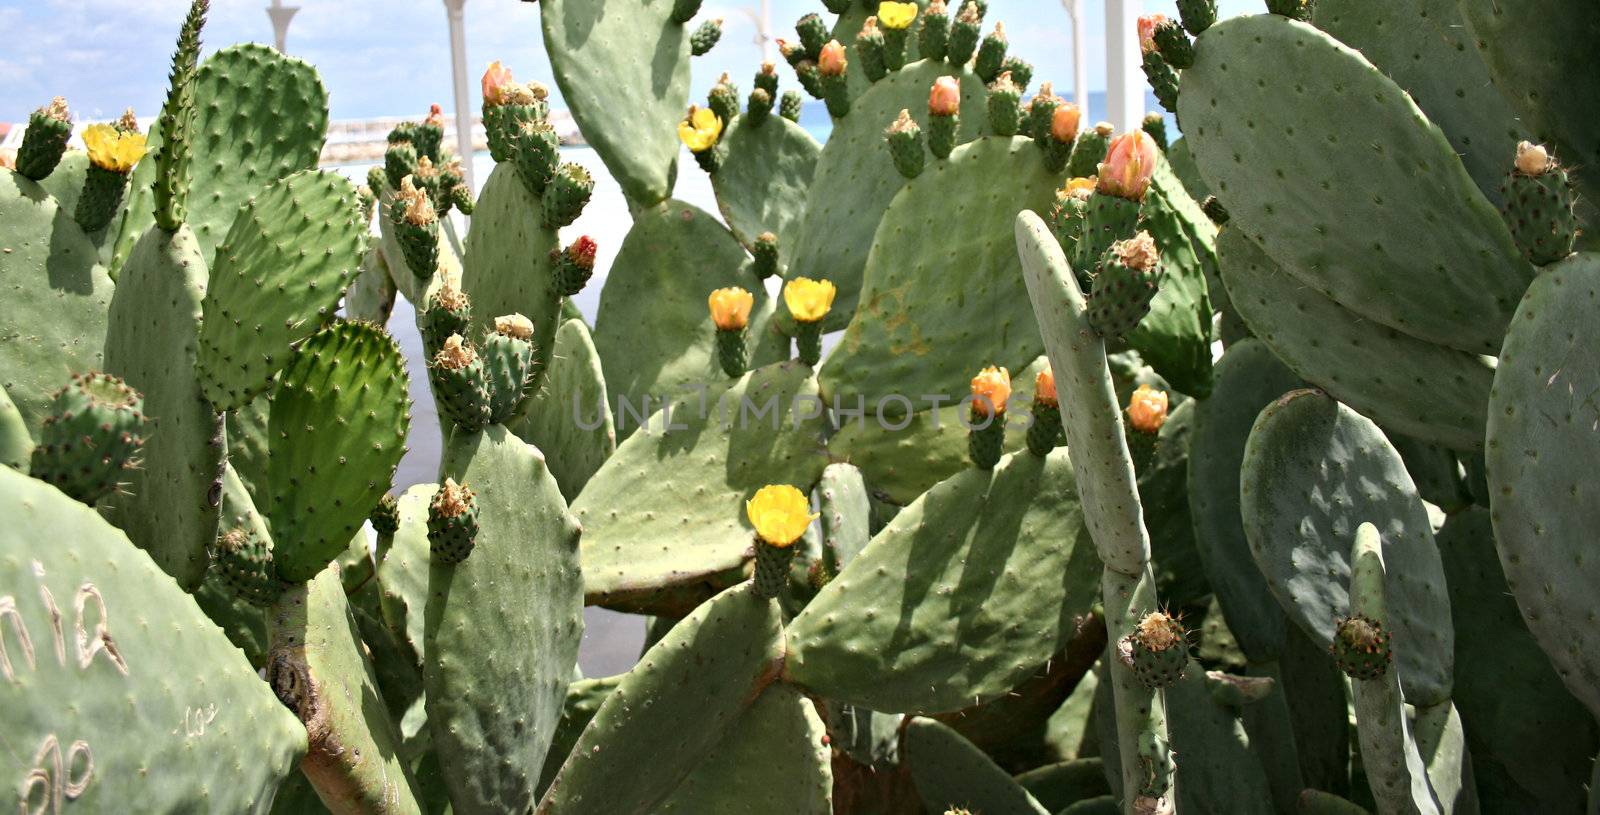 Blooming Prickly Pear or Paddle cactus with yellow flowers by ozaiachin